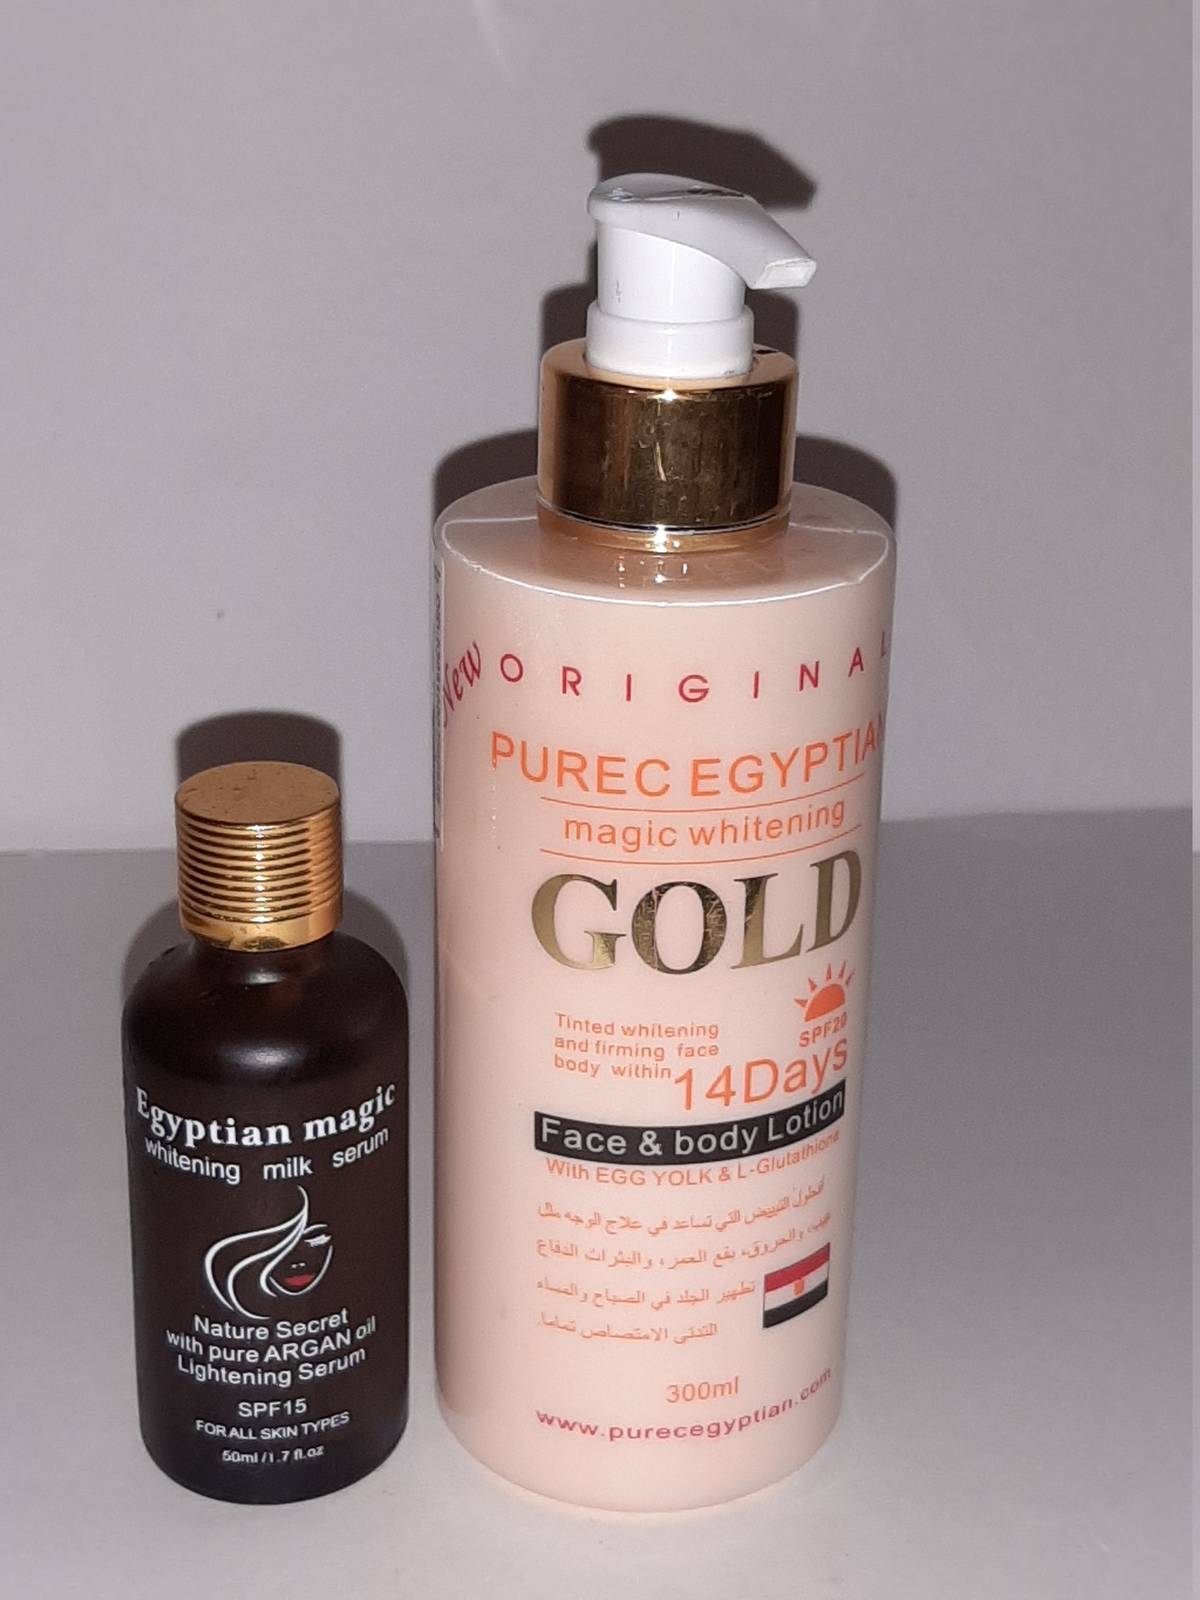 Pure Egyptian Gold whitening face & body lotion with egyptian whitening m